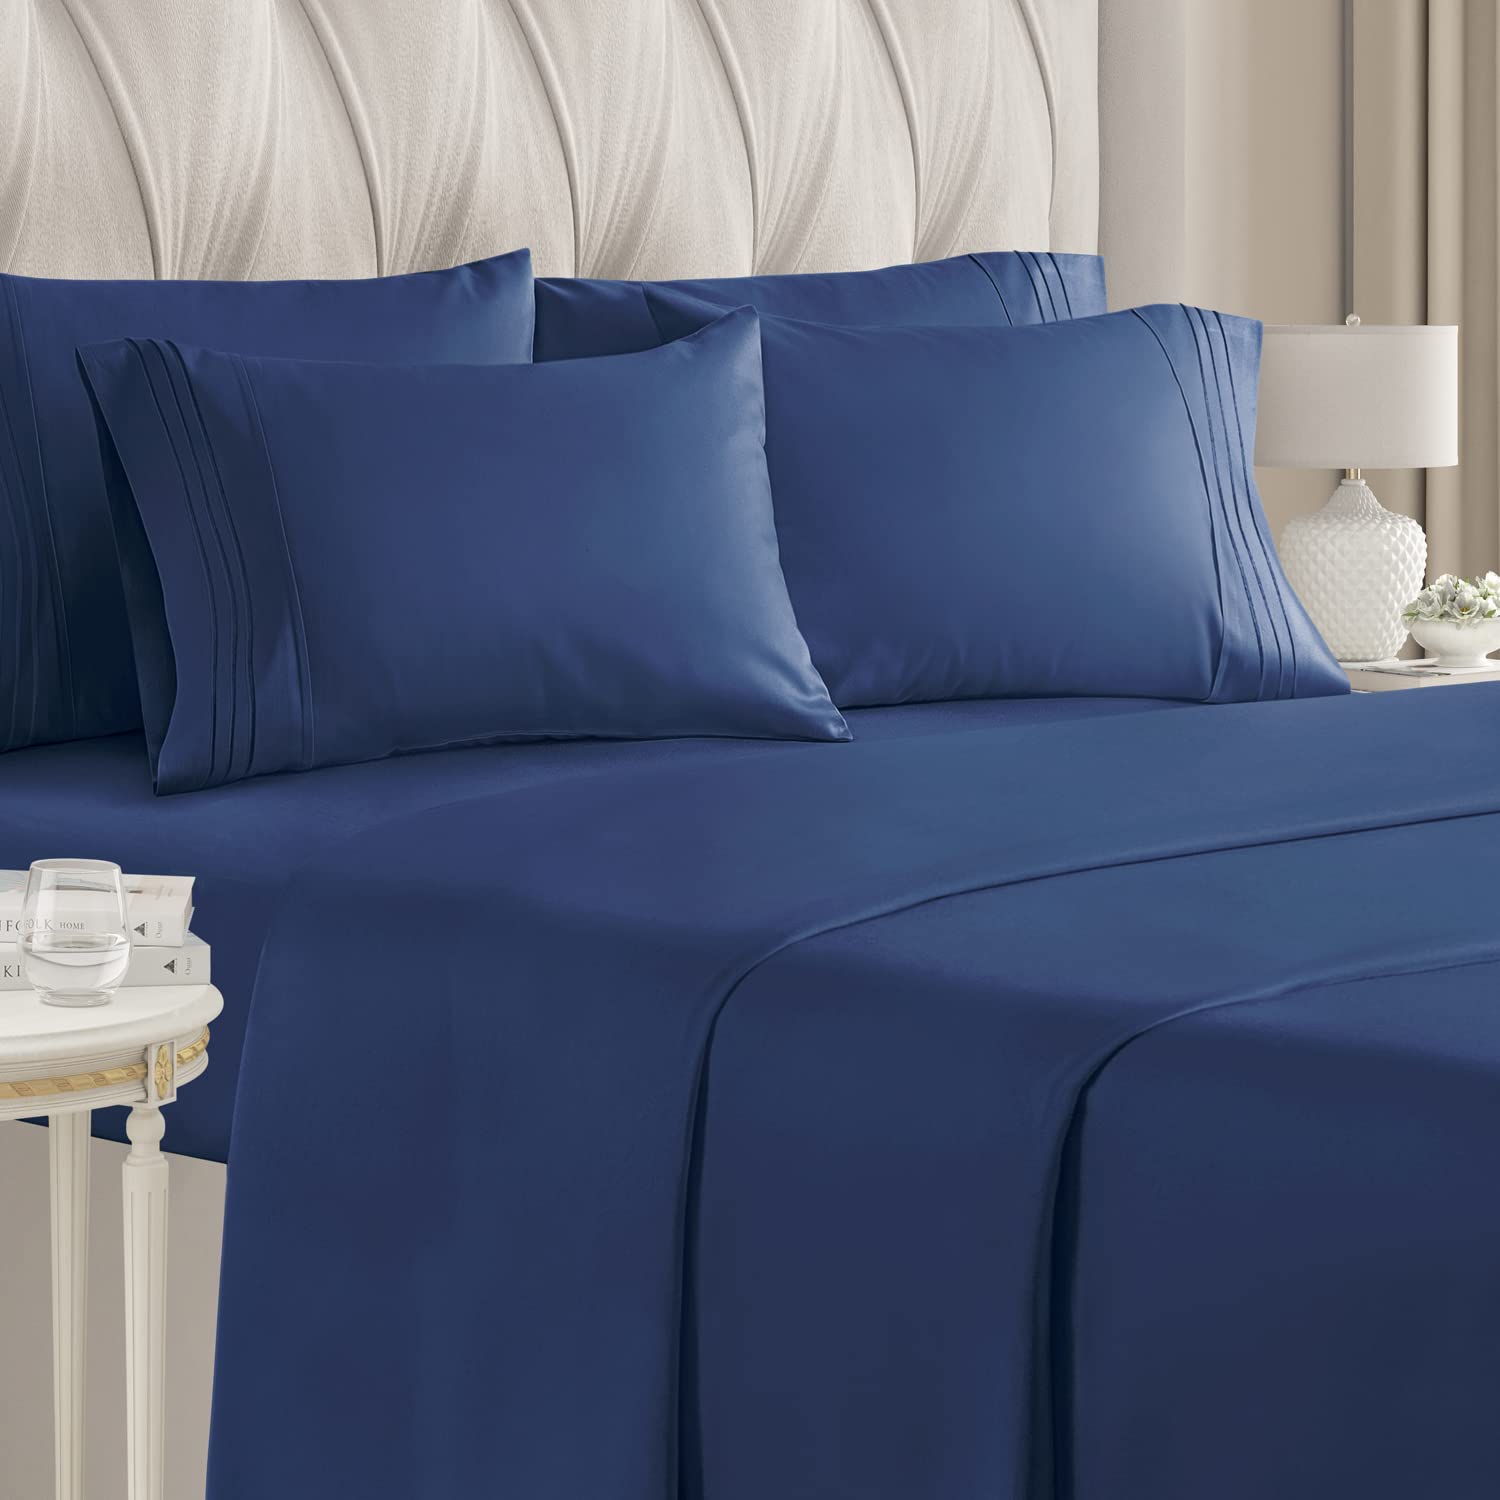 Book Cover Full Size Sheet Set - 6 Piece Set - Hotel Luxury Bed Sheets - Extra Soft - Deep Pockets - Easy Fit - Breathable & Cooling Sheets - Comfy - Royal Blue - Navy Blue Bed Sheets - Fulls Sheets - 6 PC 11 - Navy Blue Full